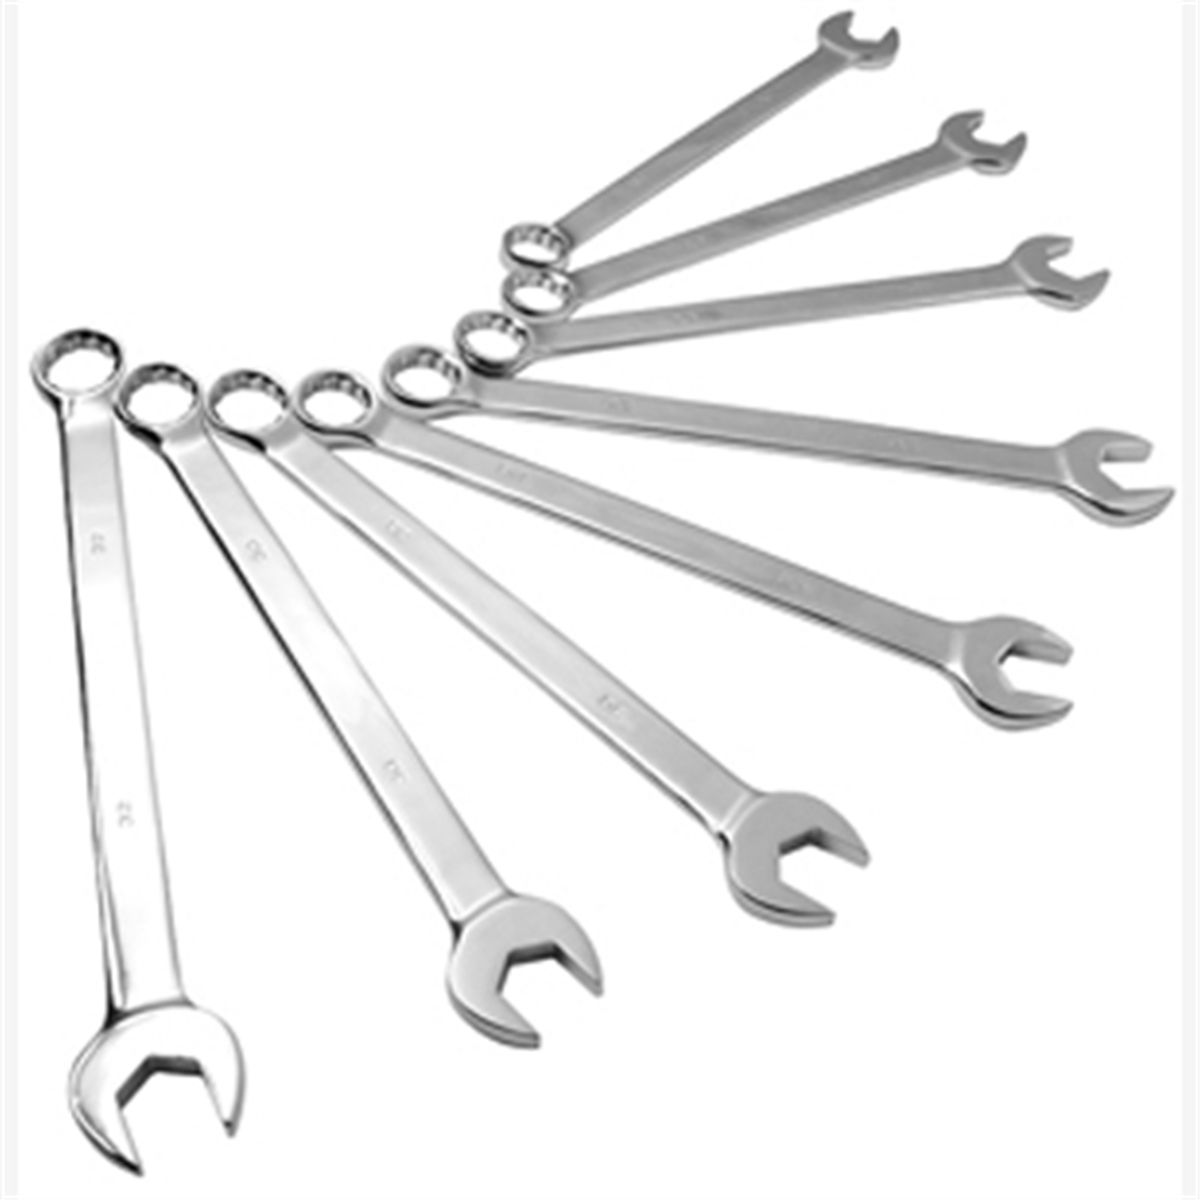 8 piece metric V-Groove Combination Wrench set